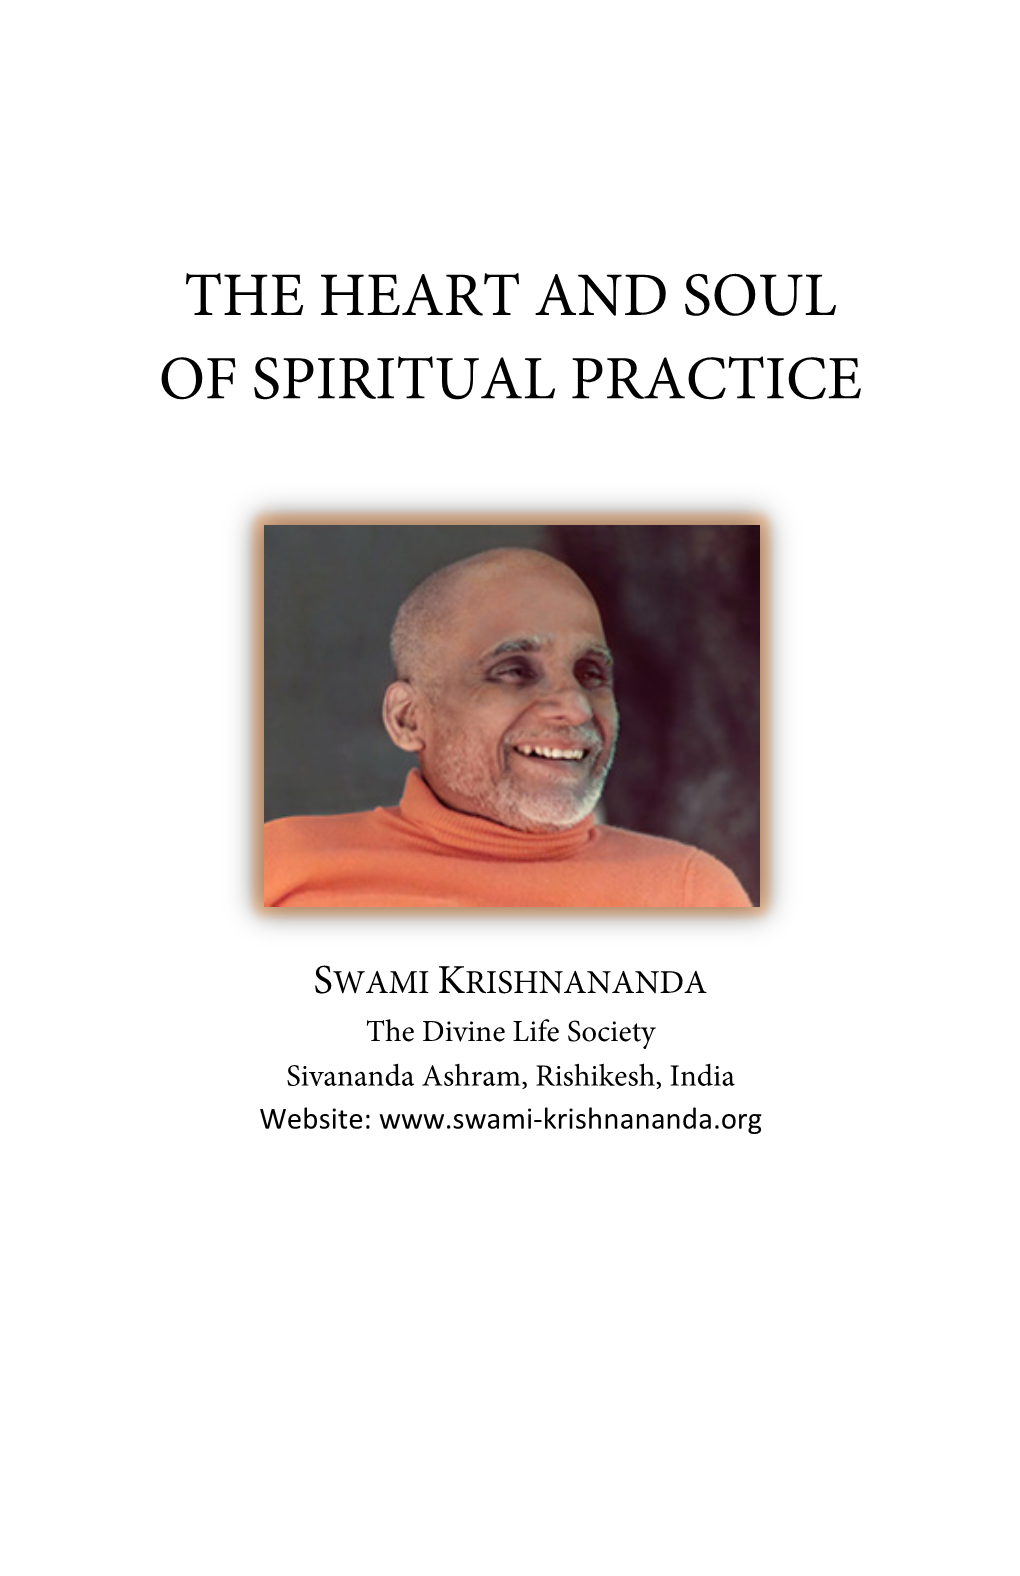 The Heart and Soul of Spiritual Practice